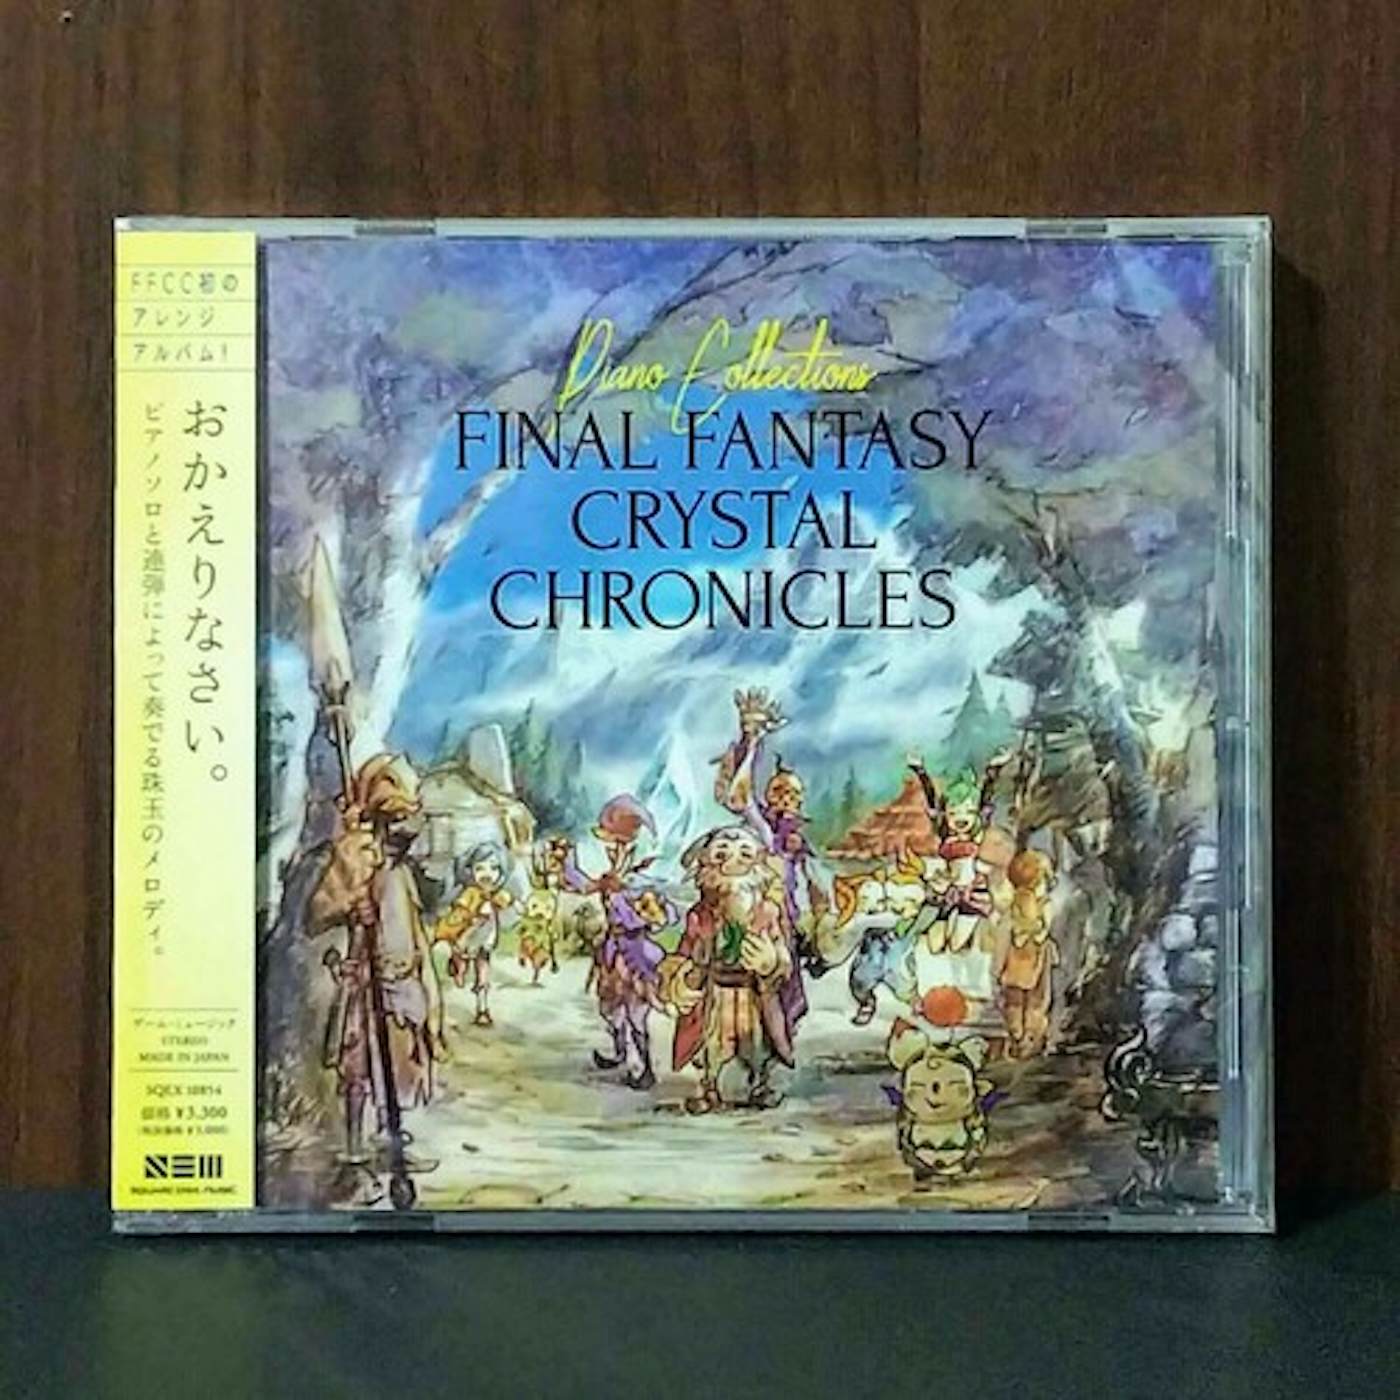 PIANO COLLECTIONS FINAL FANTASY CRYSTAL CHRONICLES CD